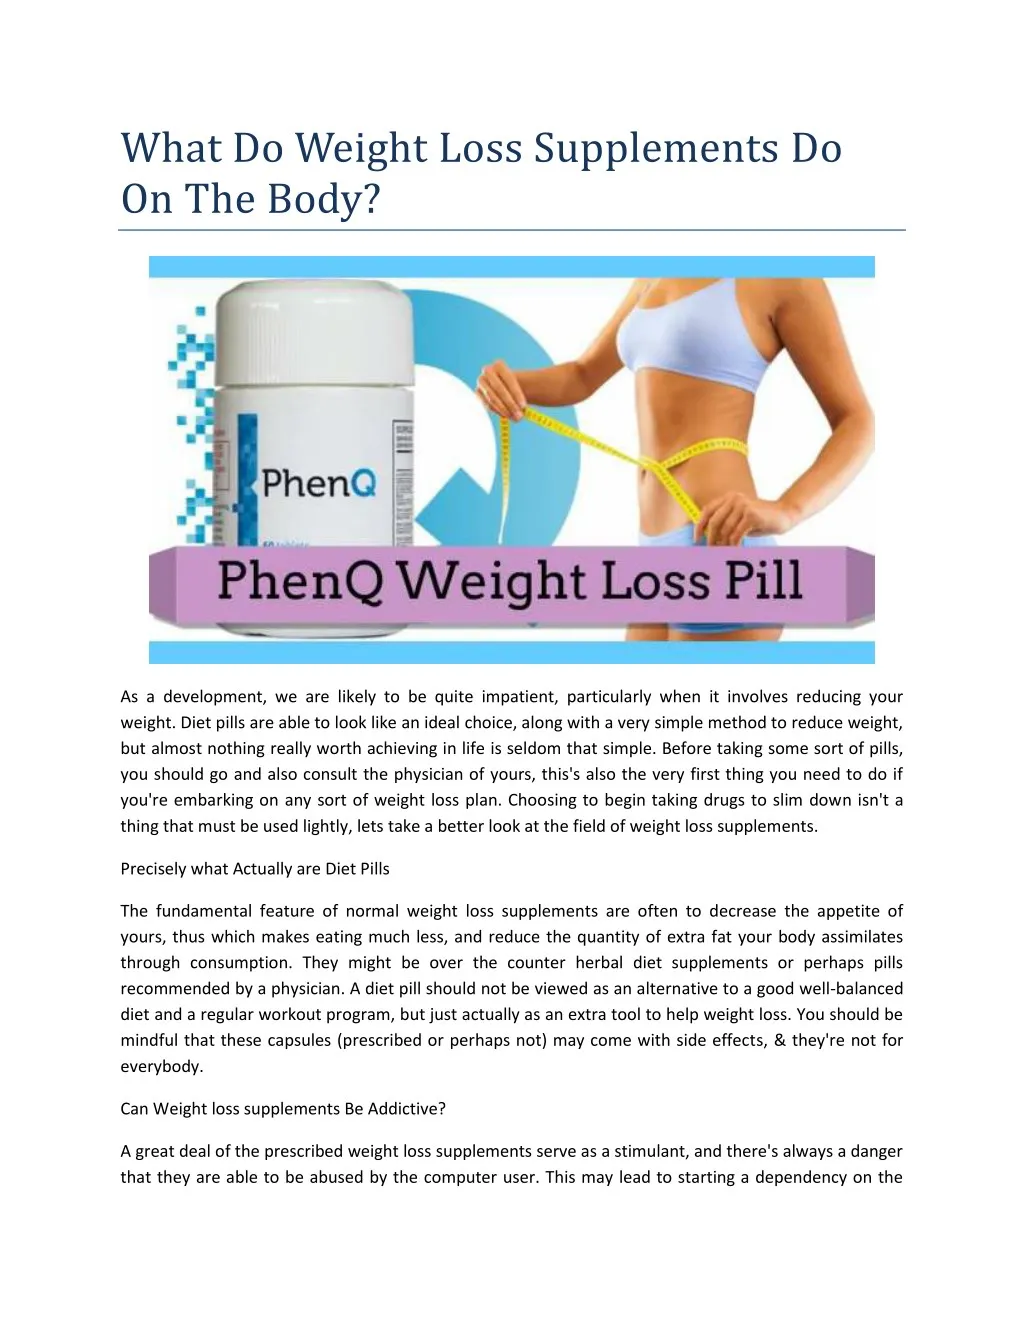 what do weight loss supplements do on the body